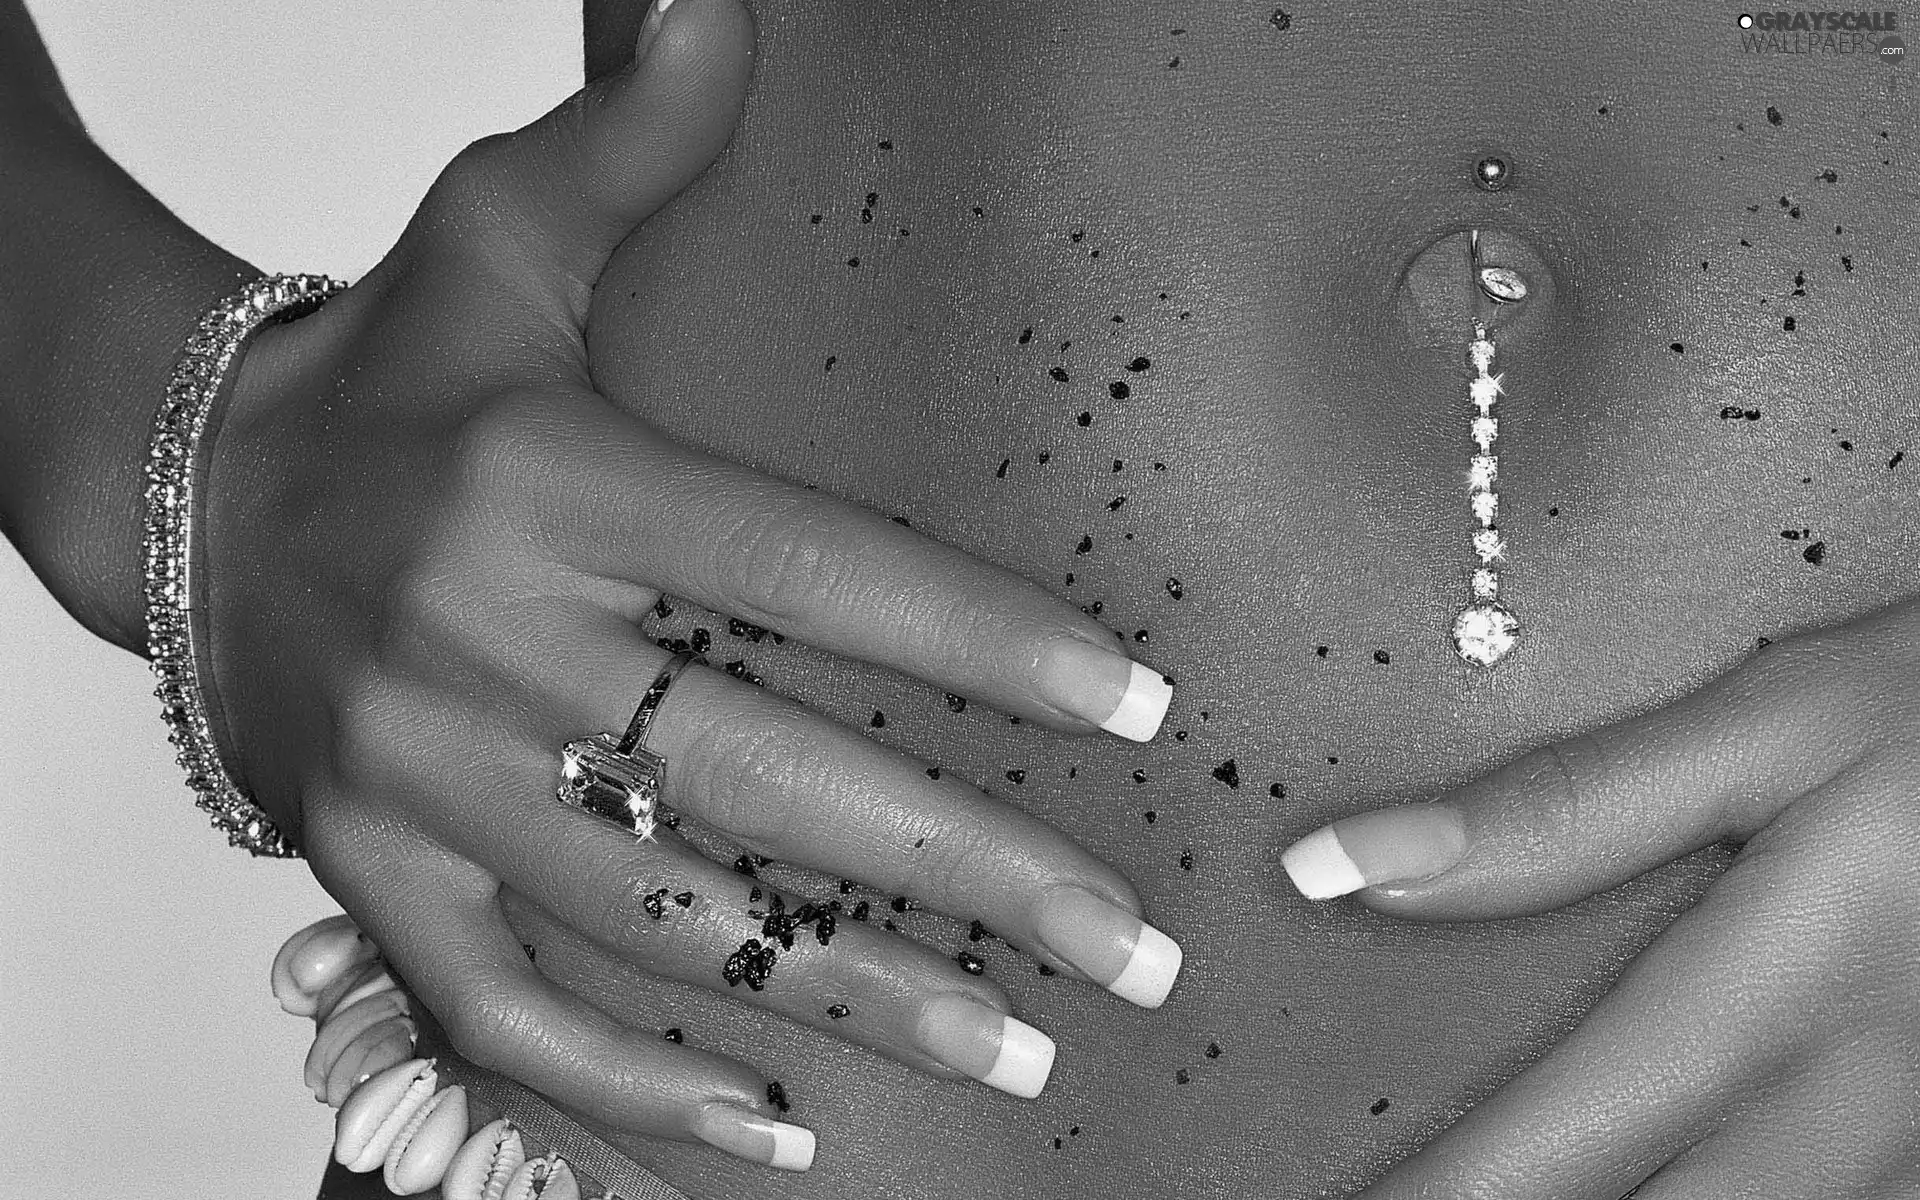 jewellery, Women, Nails, stoma, hands